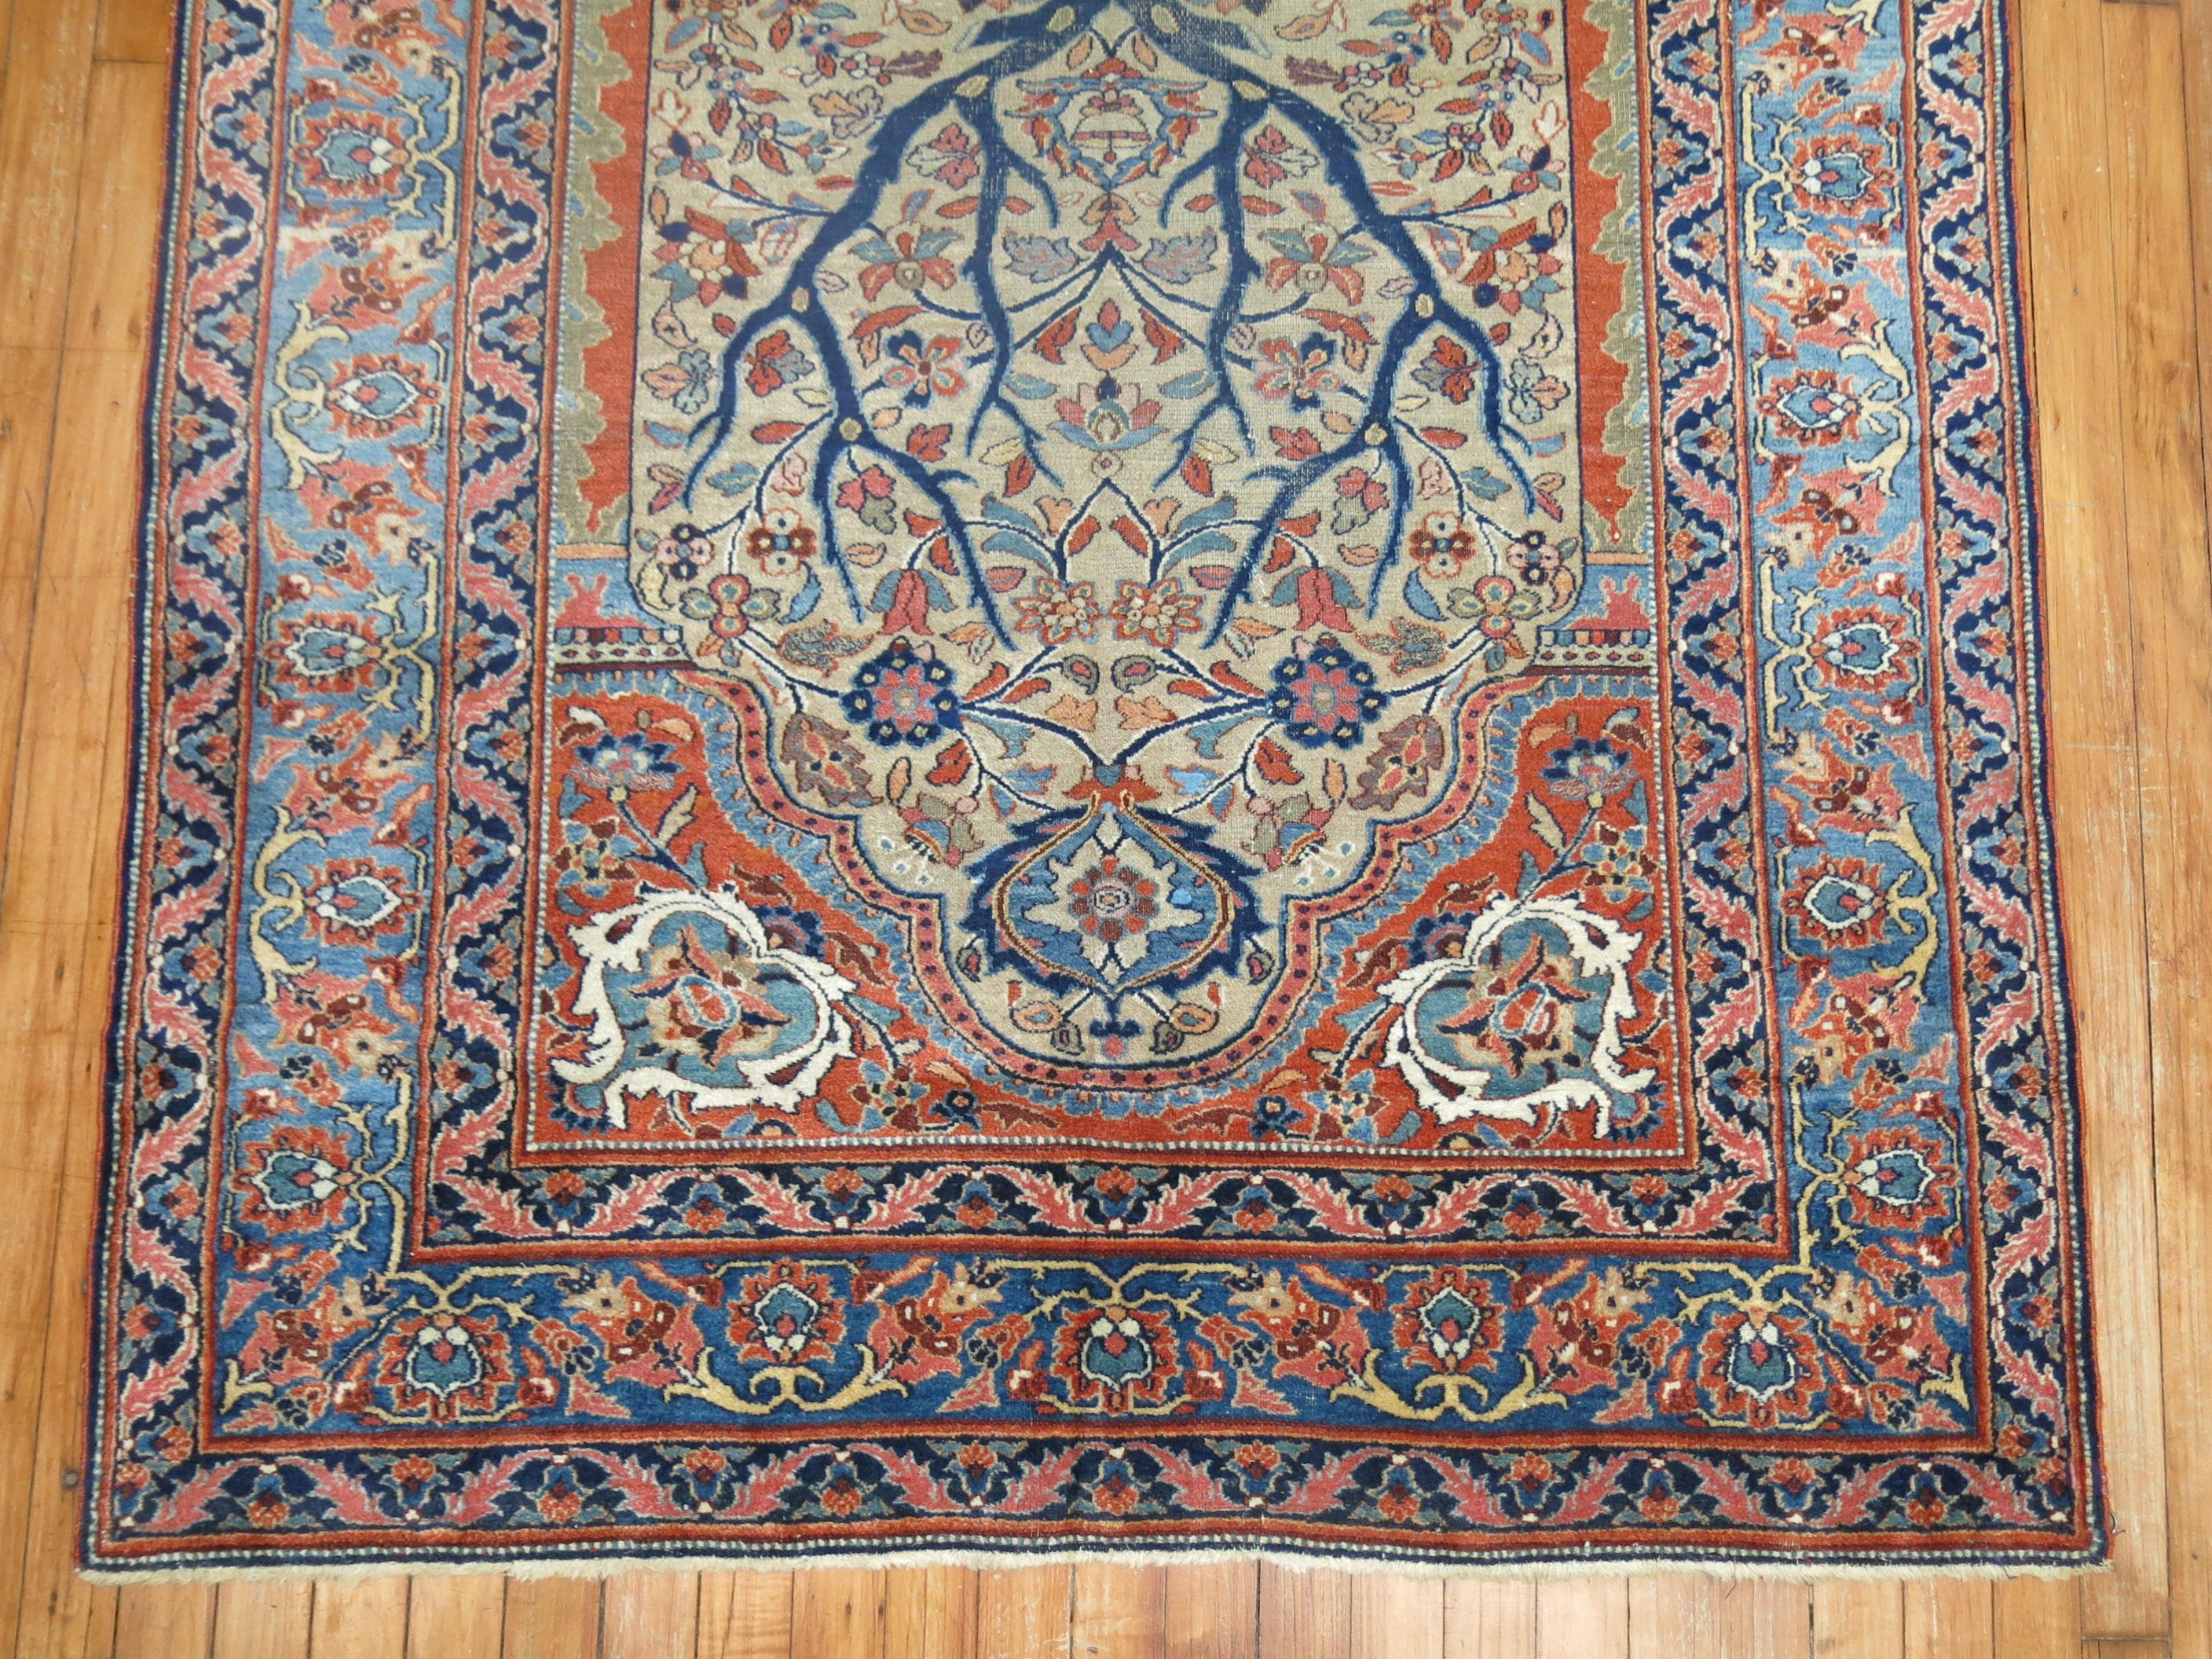 Fascinating antique Persian Doroksh animal pictorial prayer rug.

4'3'' x 6'1''

Since the mid-19th century, Tabriz has lead a resurgence in Persian carpet-weaving both for domestic use and for export. With strict standards of craftsmanship and